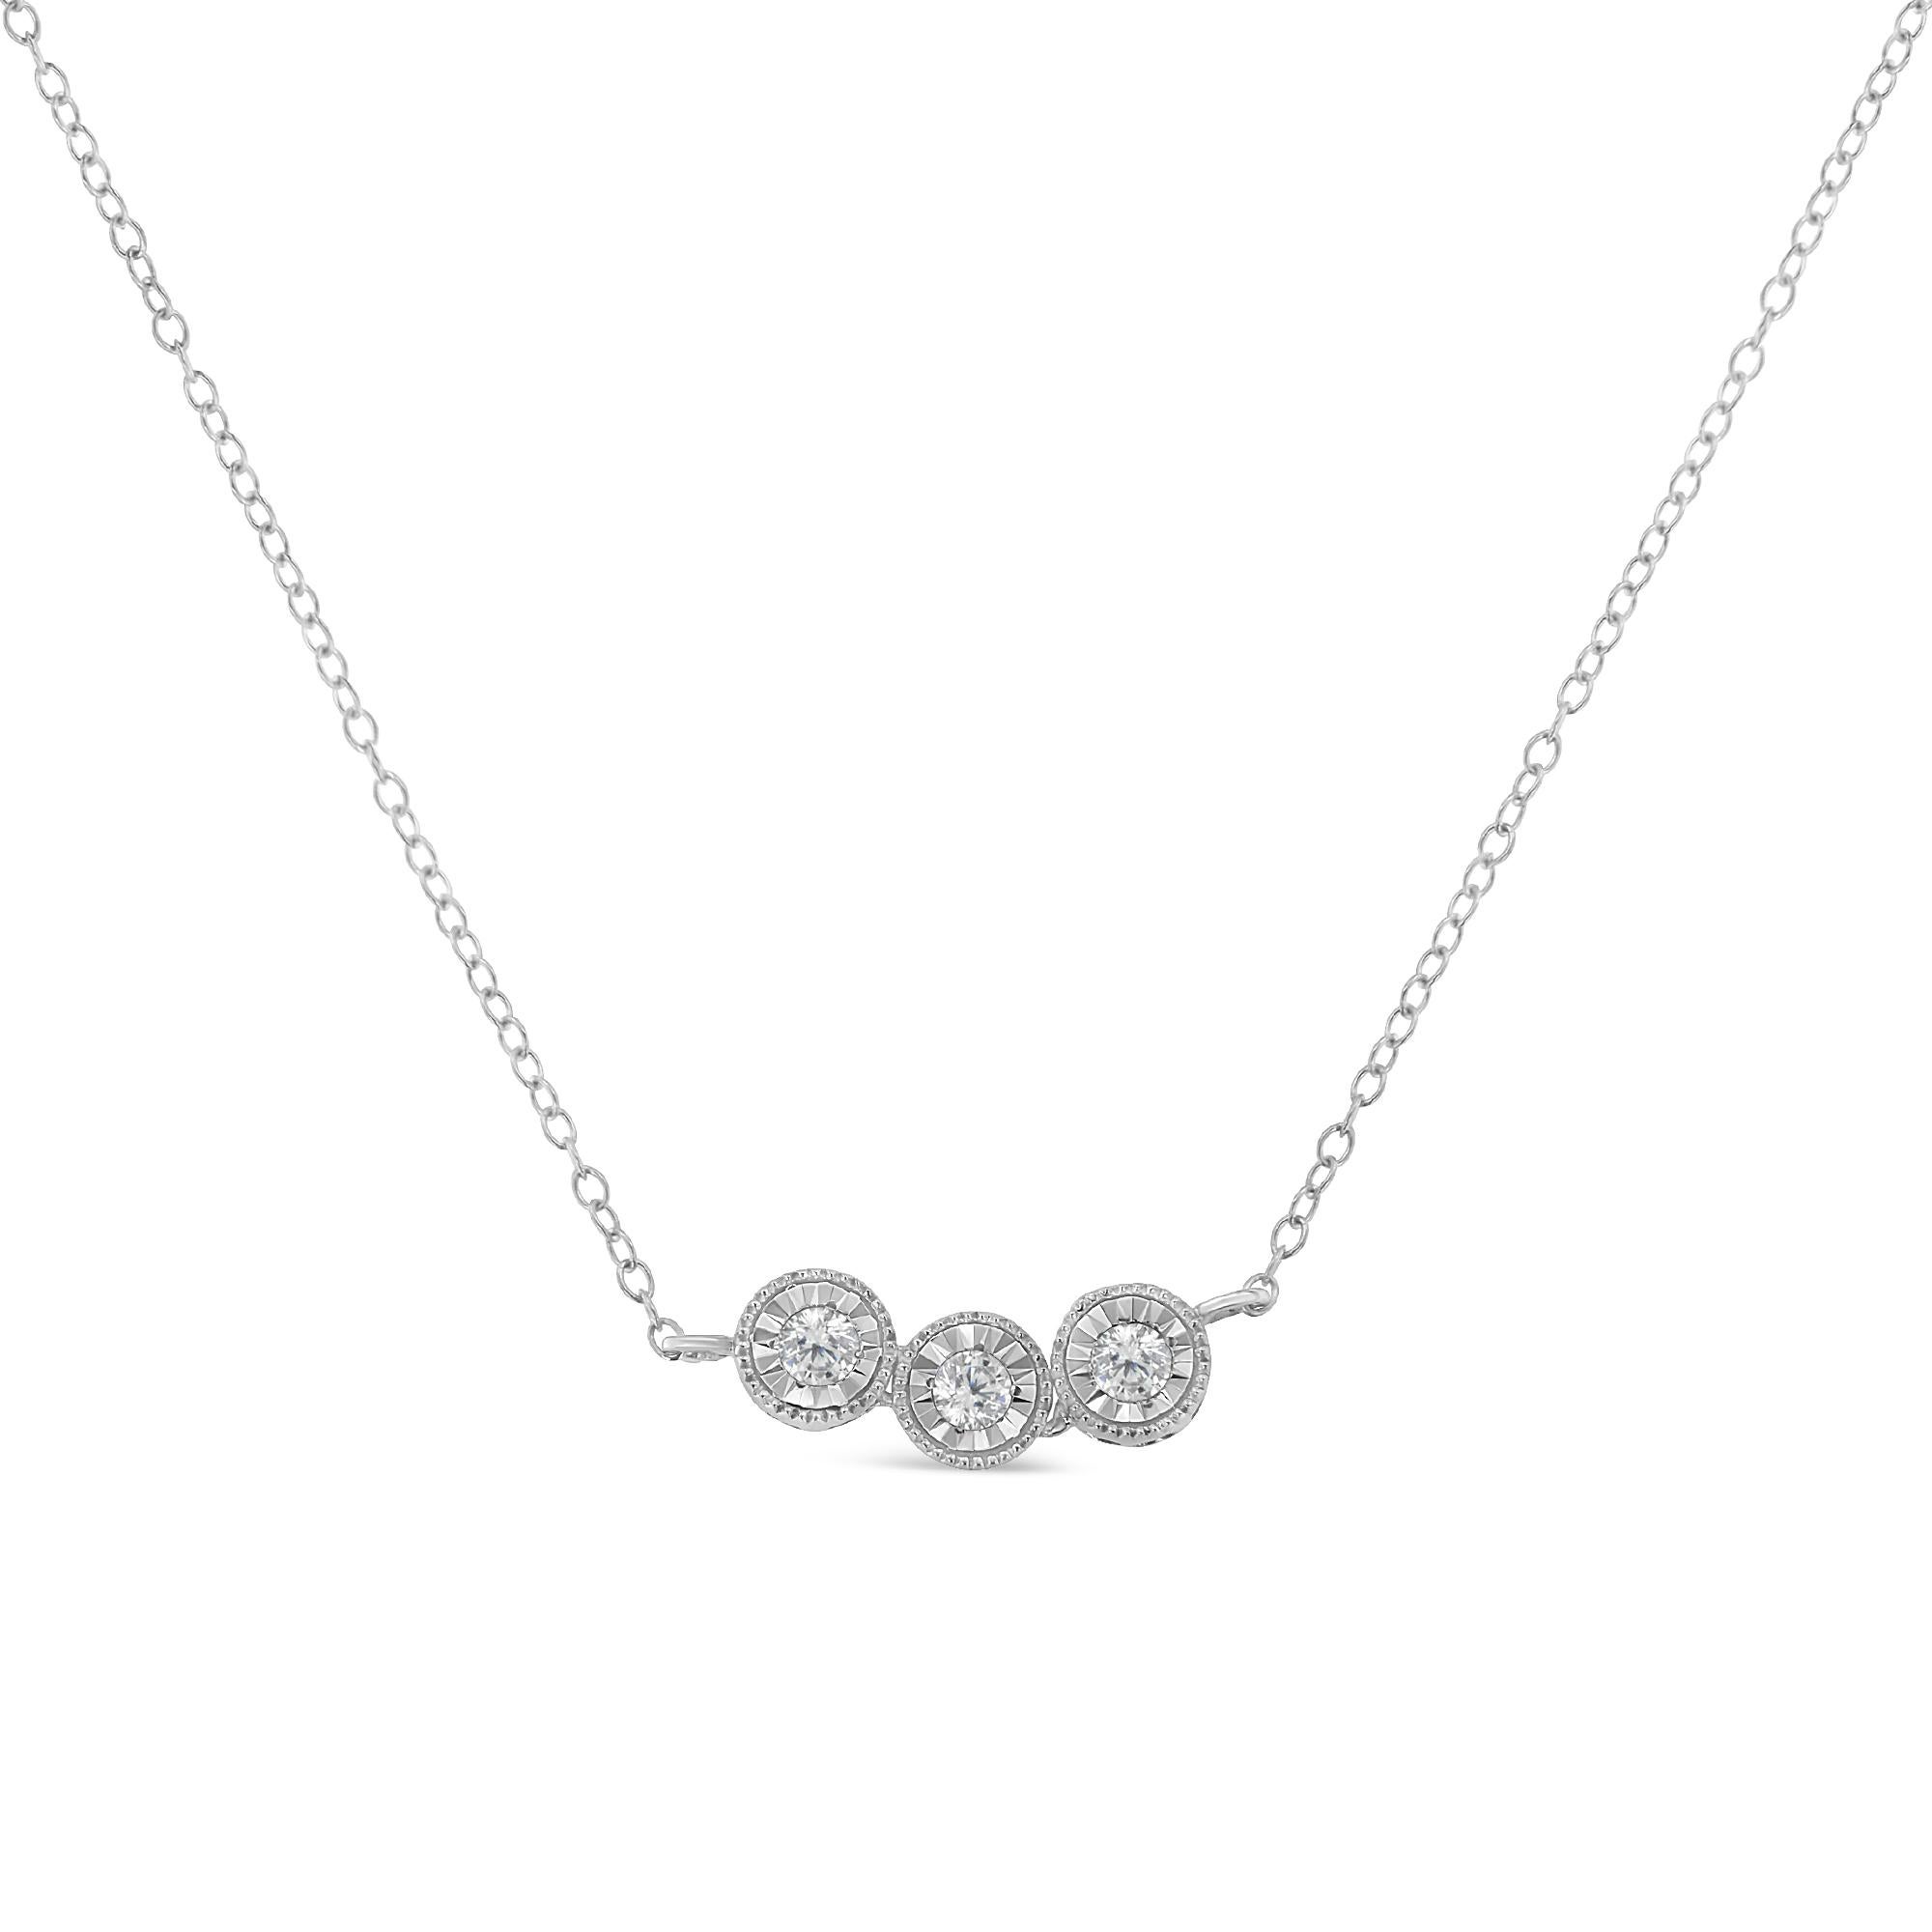 A diamond necklace that features three round diamonds set along a thin, delicate chain. The charming design has milgrain beading giving it a vintage touch. It is crafted in cool sterling silver and has a total diamond weight of 1/4 carats.

